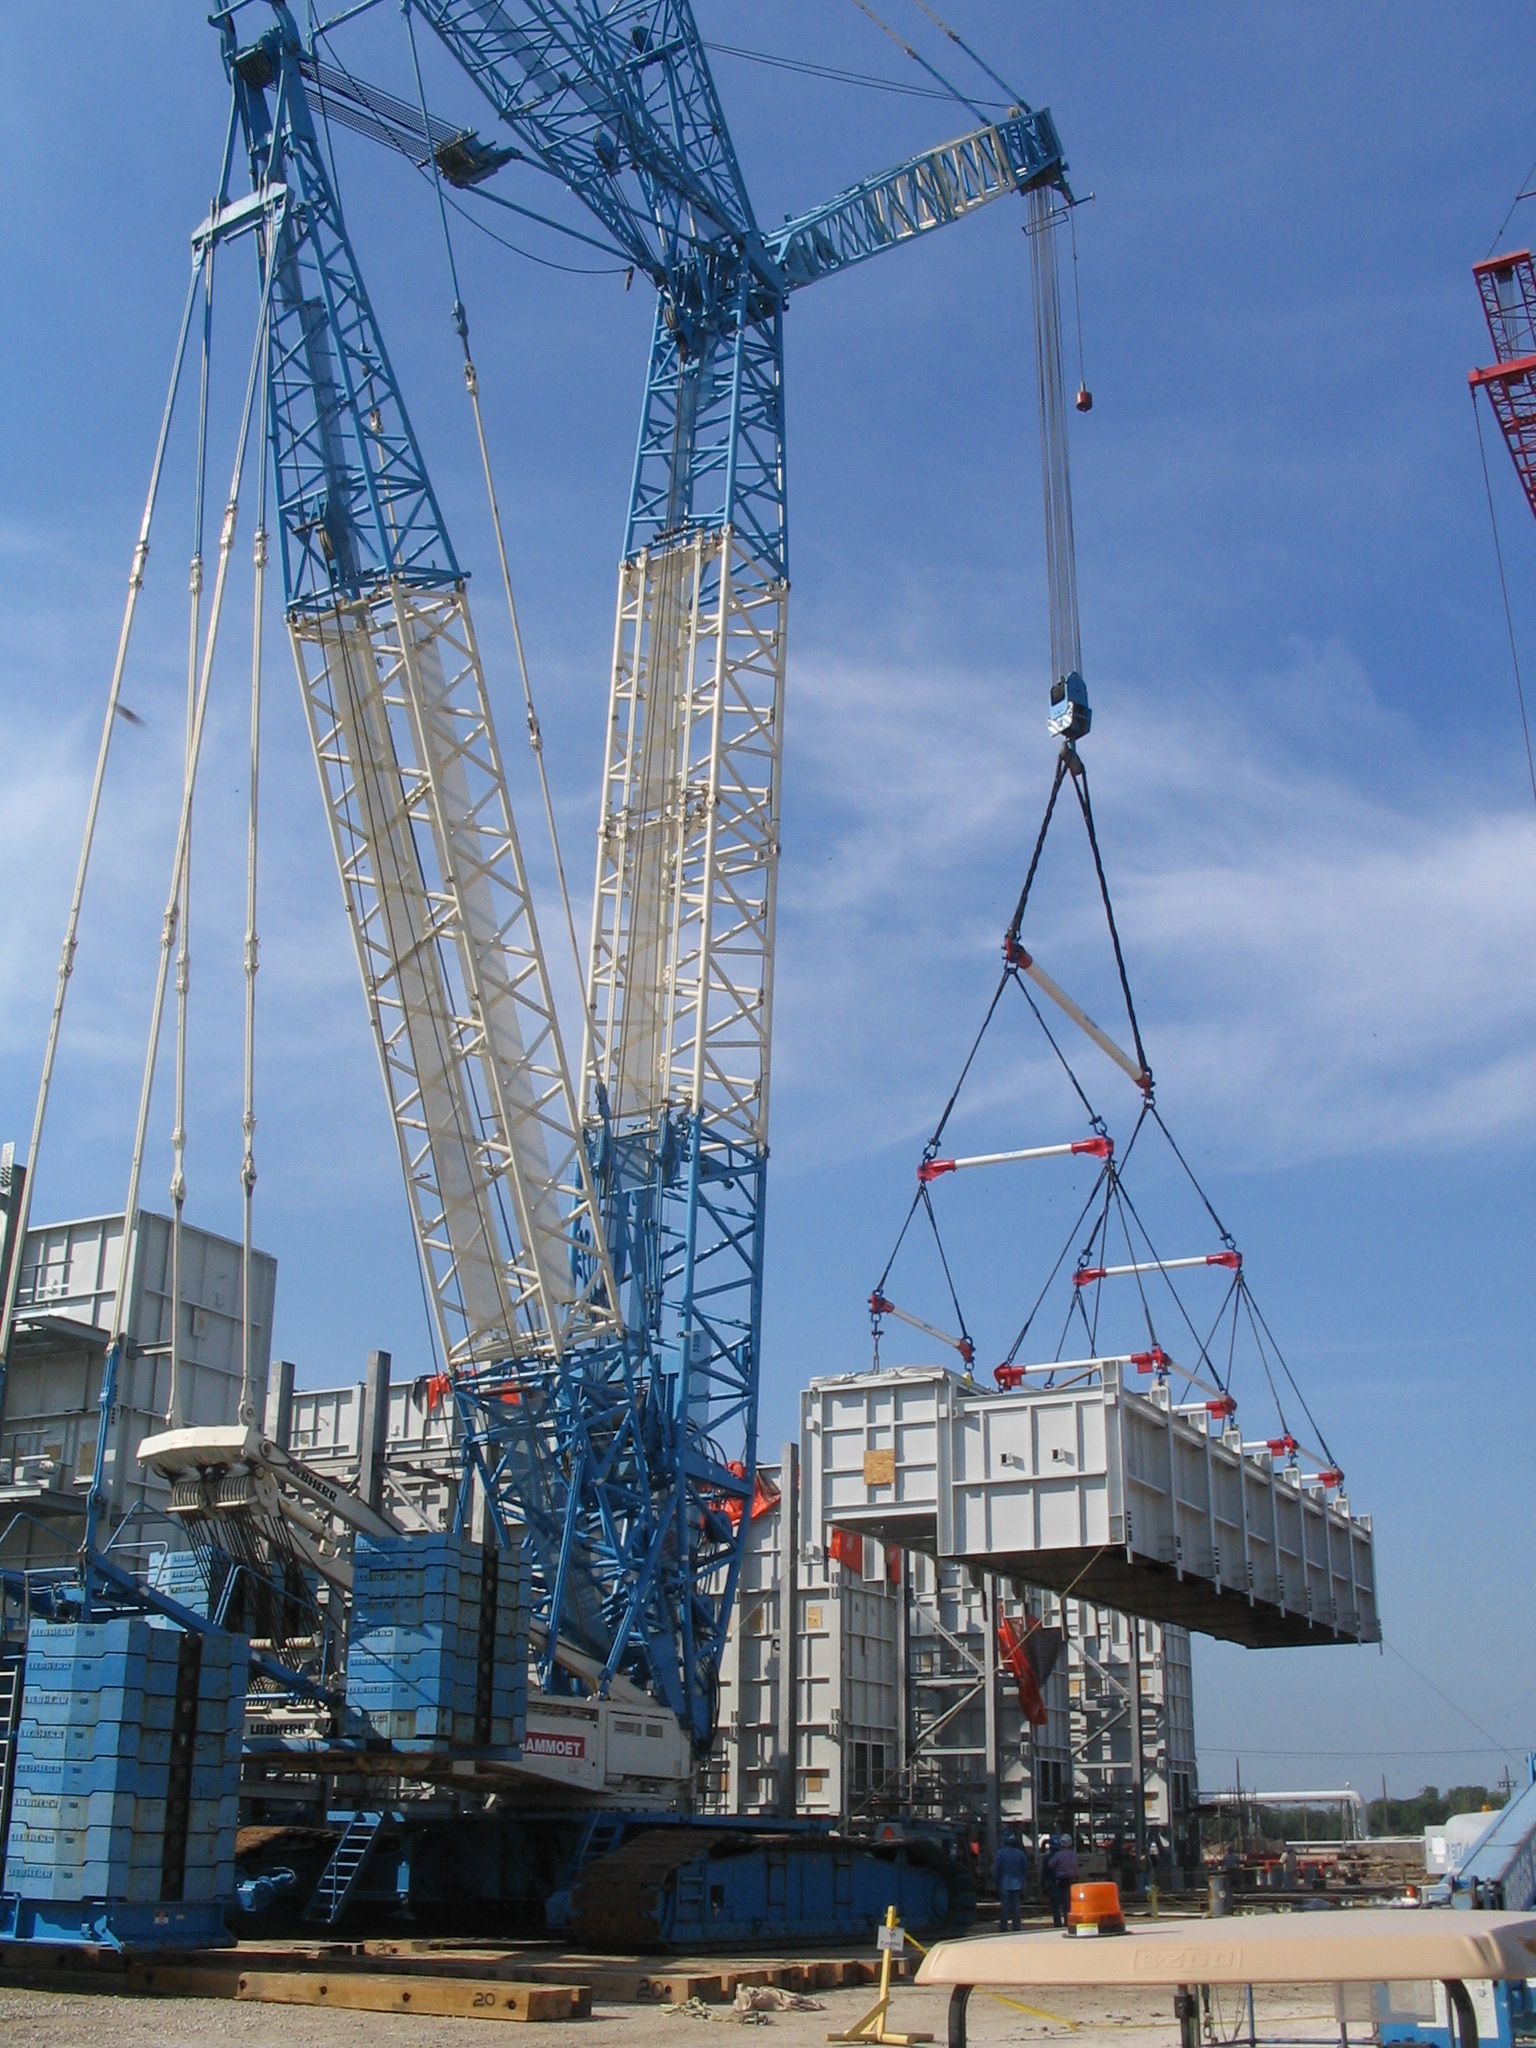 Editorial Highlights Safety Training Company’s Crane Operator, Rigger